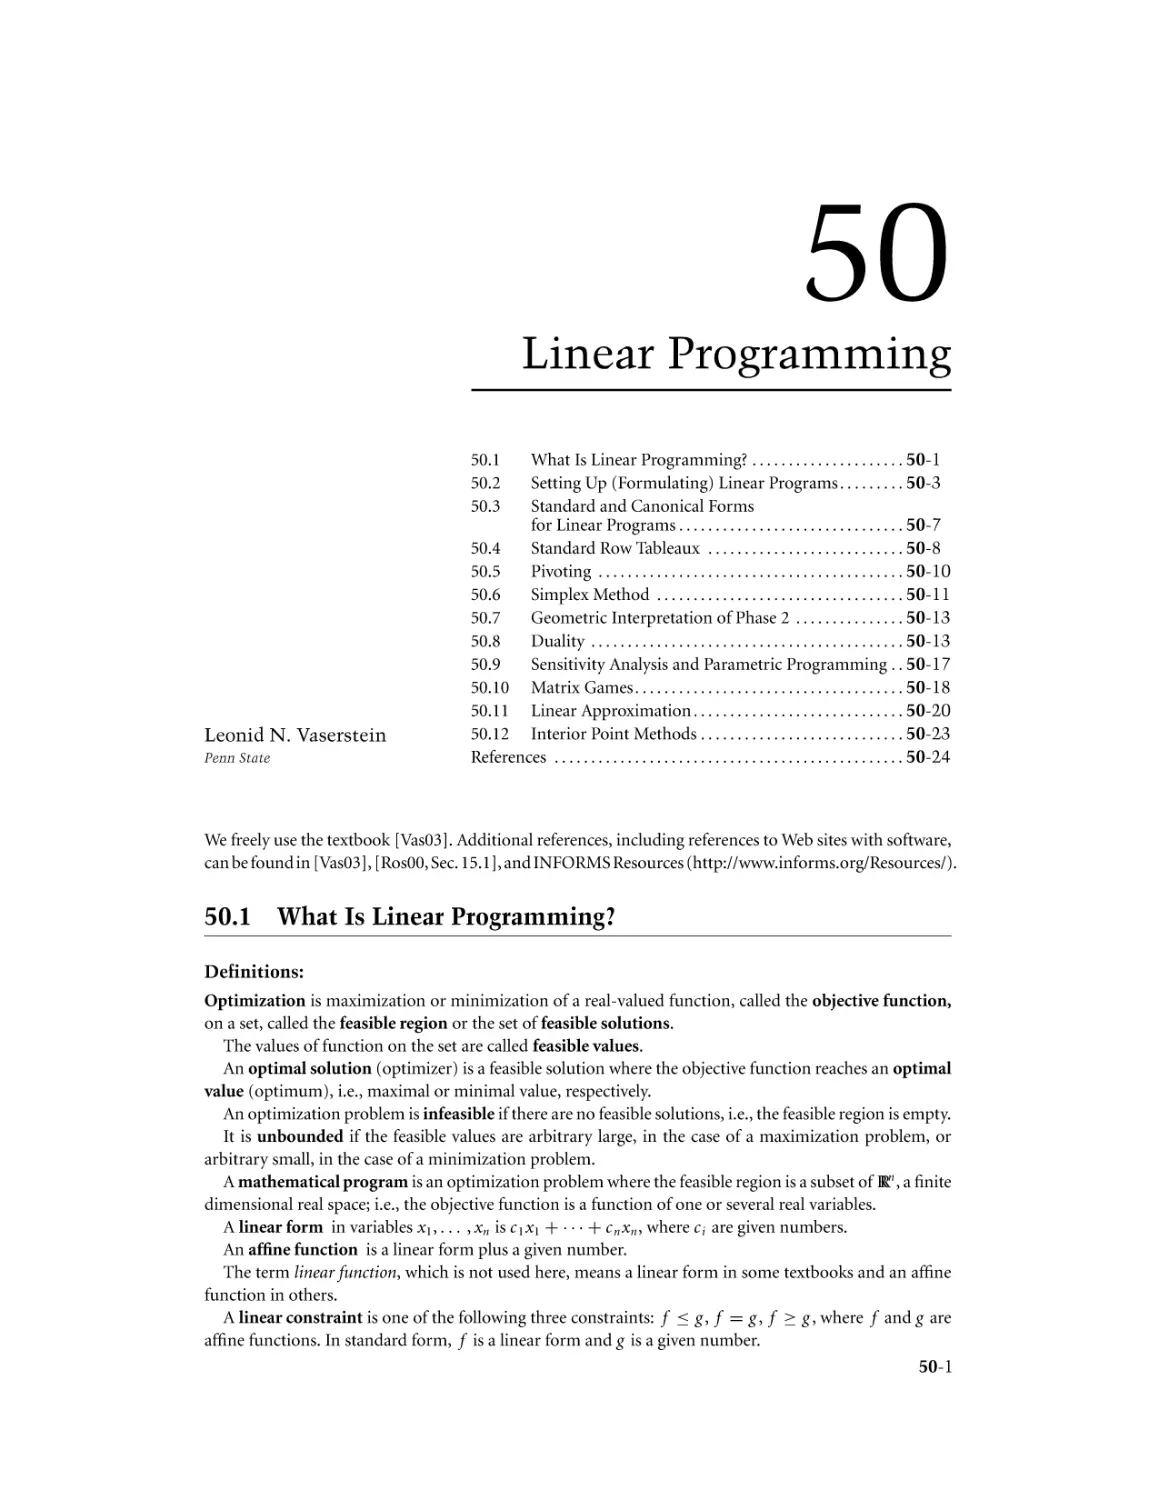 Chapter 50. Linear Programming